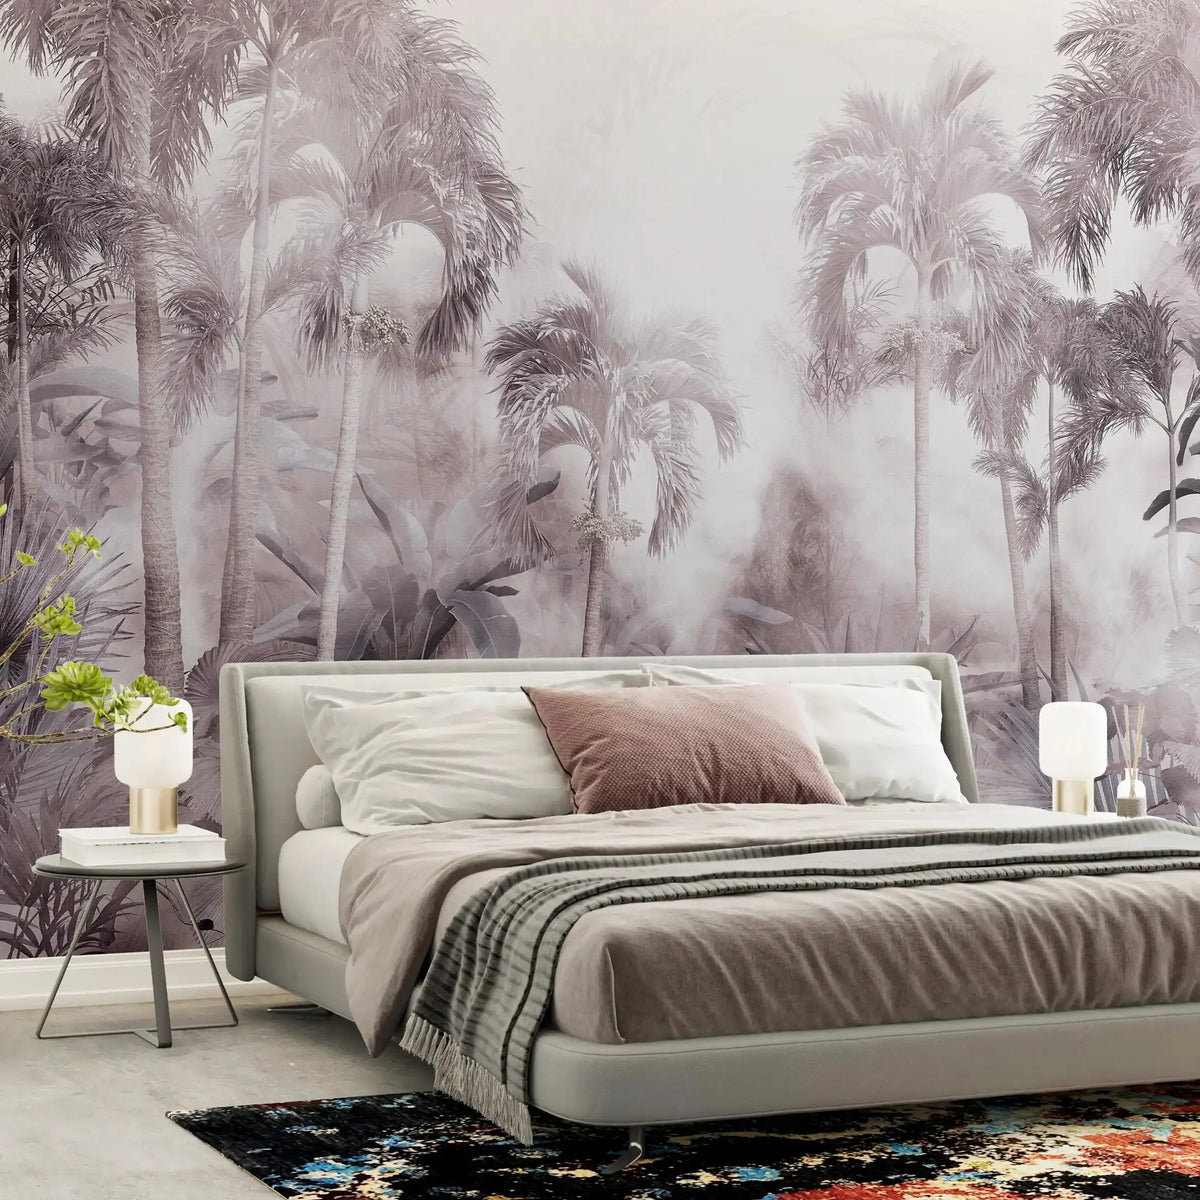 3029-C / Temporary Wallpaper: Tropical Jungle in Foggy Watercolor, Peel and Stick for Renters and DIY Deco - Artevella